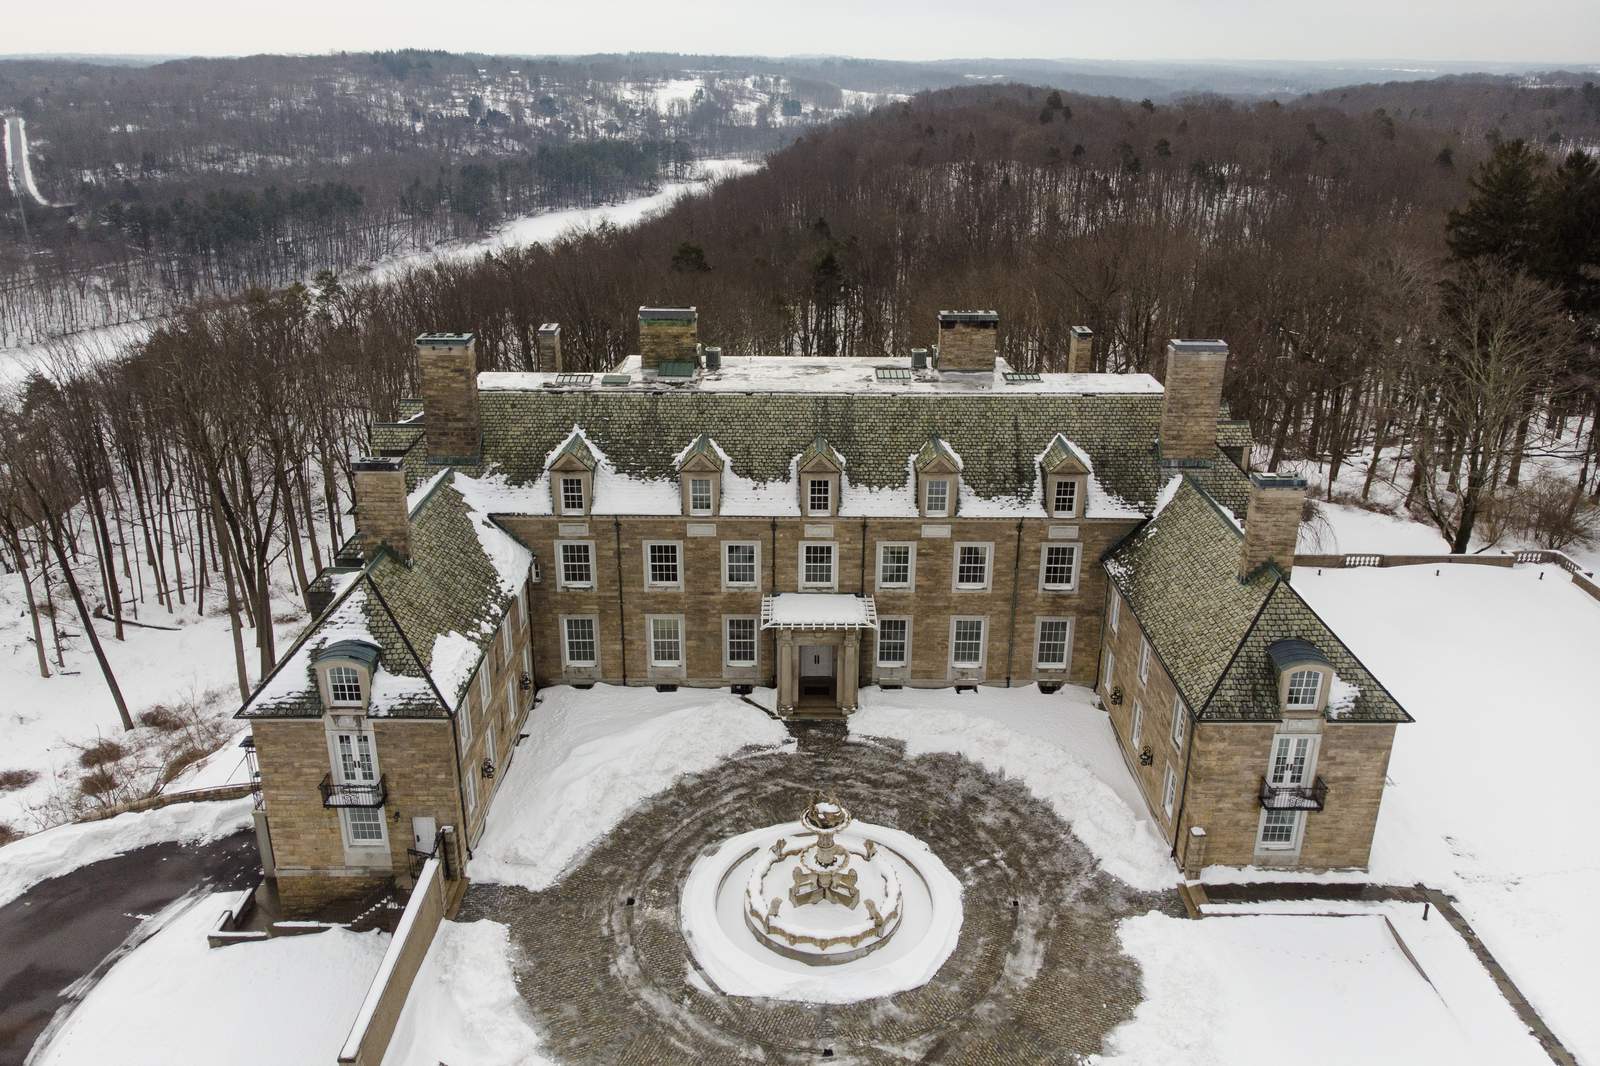 Claimed value of sleepy NY estate could come to haunt Trump